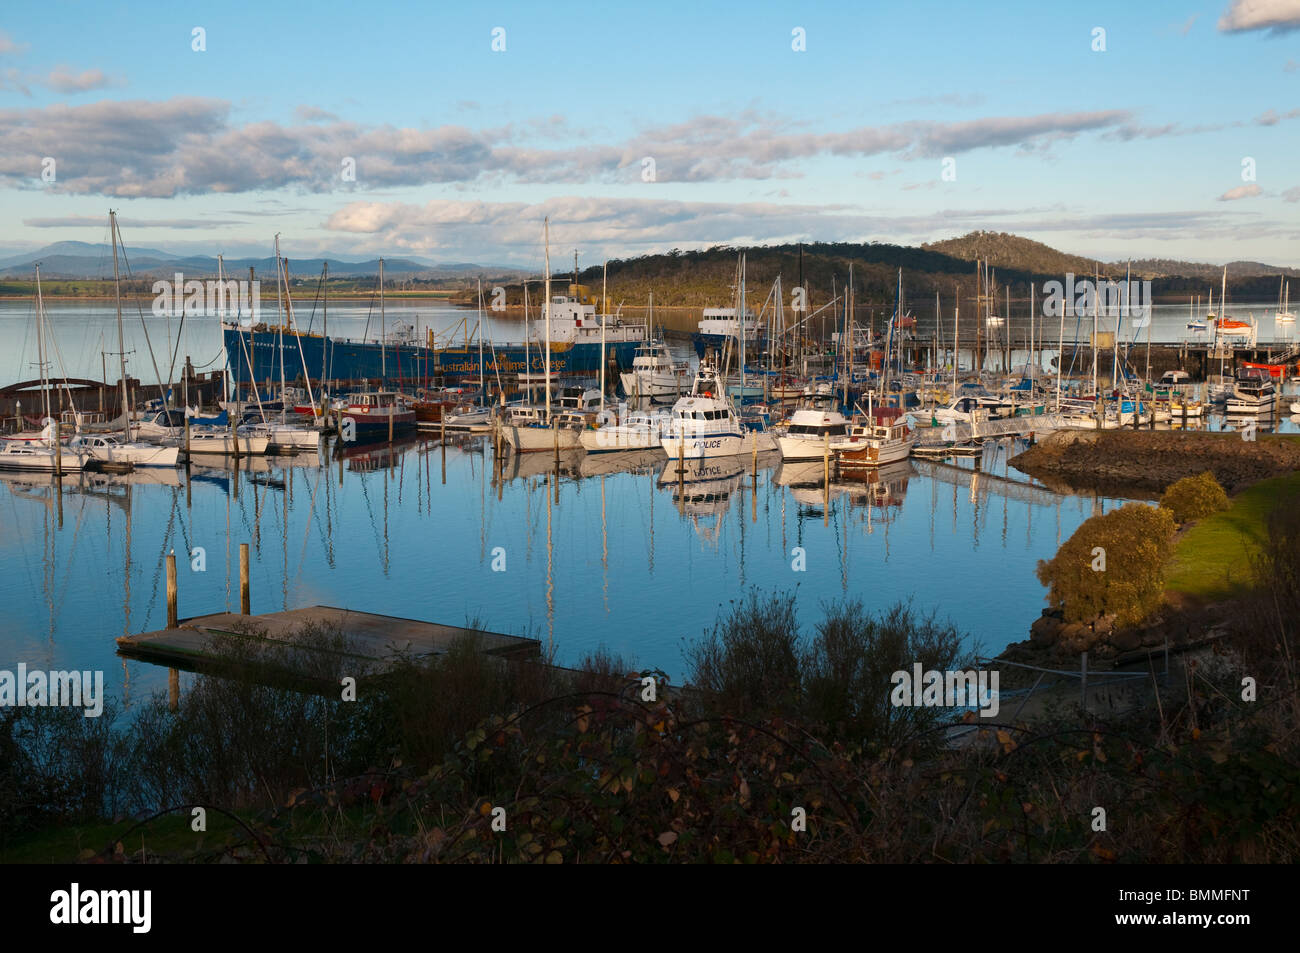 Yachts and the Australian Maritime College ship moored on the Tamar River in Tasmania at Beauty Point Stock Photo